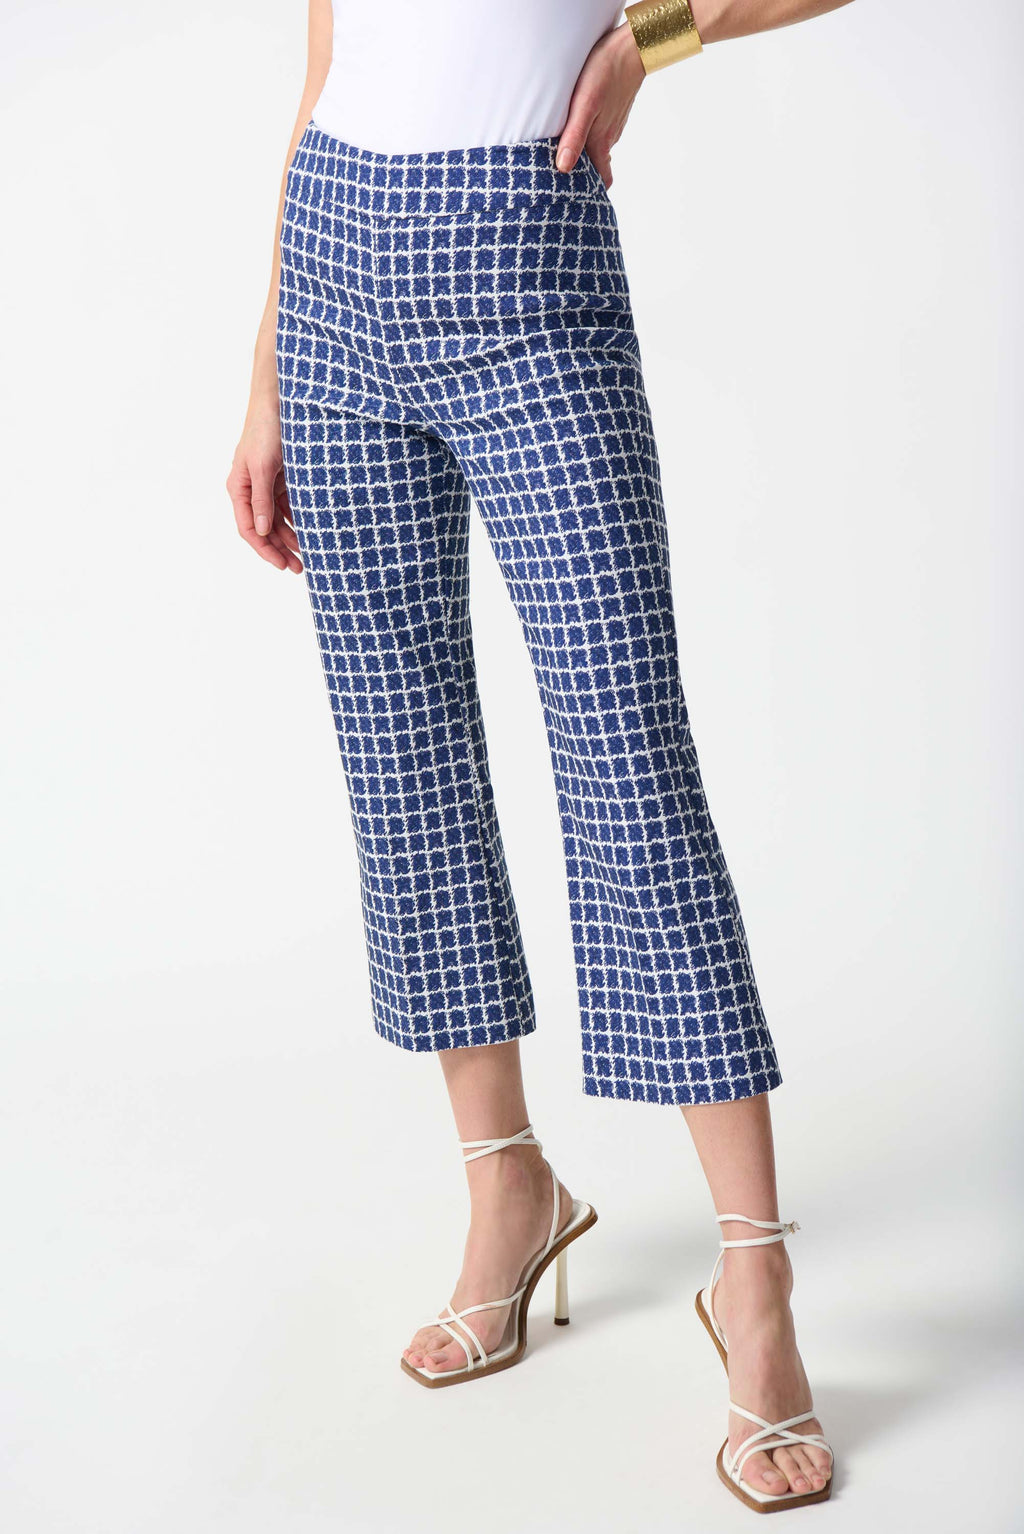 Discover the dynamic style of these geometric printed woven stretch jacquard pants. The flared leg and structured contour waistband combine comfort and elegance. This piece is perfect for versatile fashion statements. Embrace the chic pattern and express your individuality with this playful addition to your wardrobe!